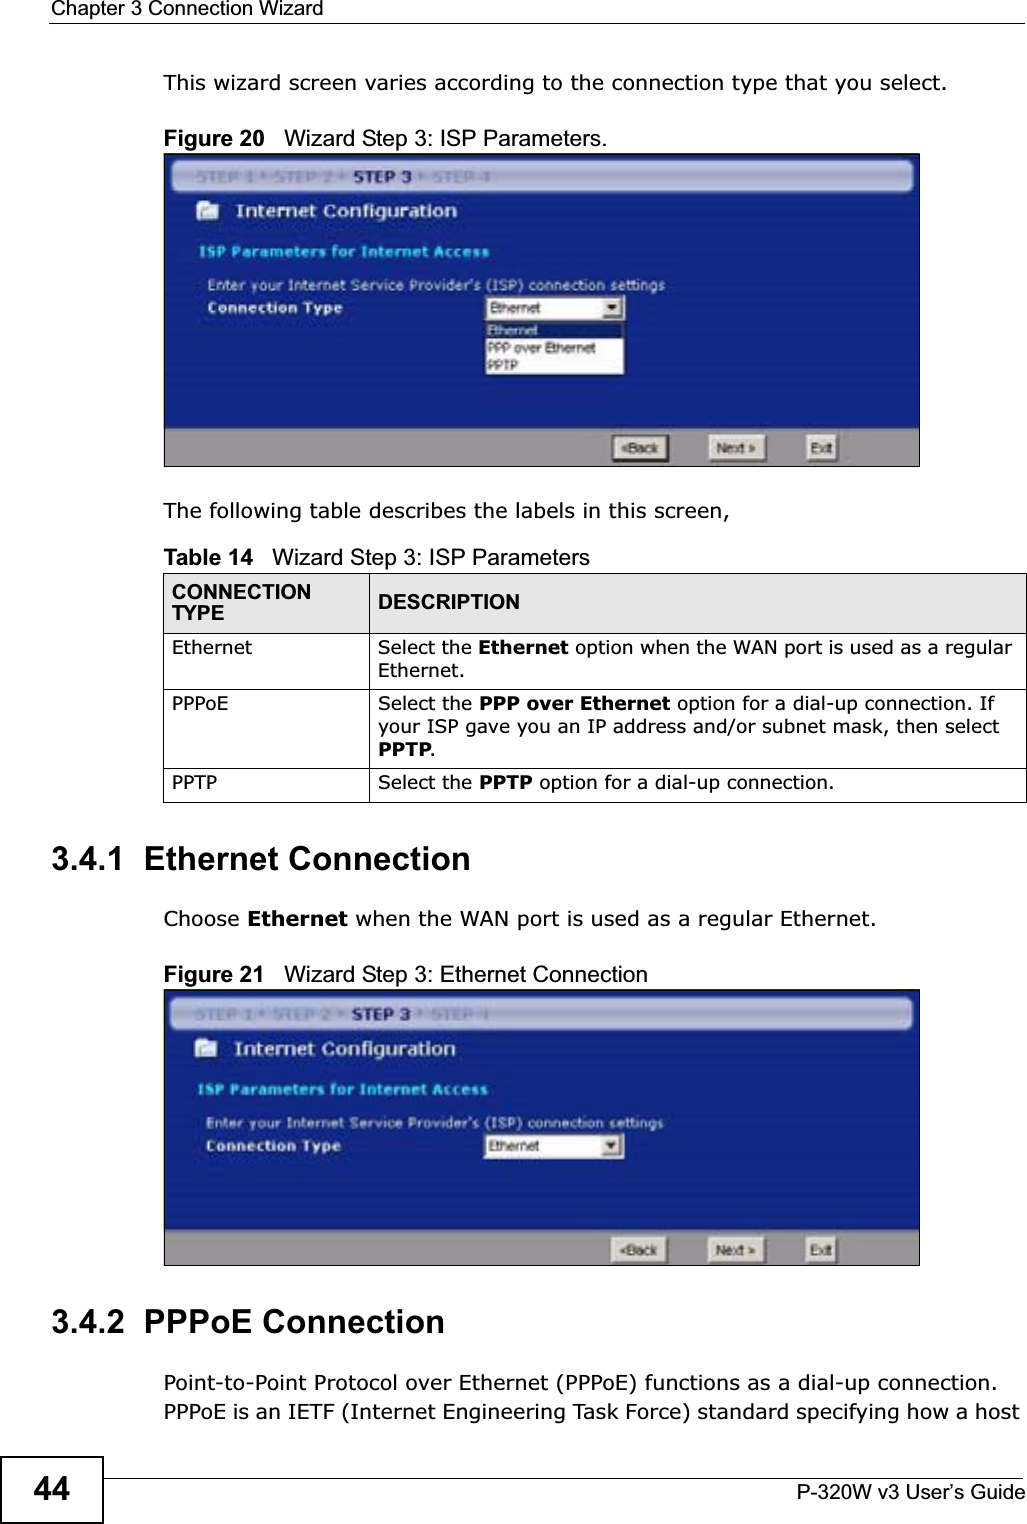 Chapter 3 Connection WizardP-320W v3 User’s Guide44This wizard screen varies according to the connection type that you select.Figure 20   Wizard Step 3: ISP Parameters.The following table describes the labels in this screen,3.4.1  Ethernet ConnectionChoose Ethernet when the WAN port is used as a regular Ethernet.Figure 21   Wizard Step 3: Ethernet Connection3.4.2  PPPoE ConnectionPoint-to-Point Protocol over Ethernet (PPPoE) functions as a dial-up connection. PPPoE is an IETF (Internet Engineering Task Force) standard specifying how a host Table 14   Wizard Step 3: ISP ParametersCONNECTION TYPE DESCRIPTIONEthernet Select the Ethernet option when the WAN port is used as a regular Ethernet. PPPoE Select the PPP over Ethernet option for a dial-up connection. If your ISP gave you an IP address and/or subnet mask, then select PPTP.PPTP Select the PPTP option for a dial-up connection.